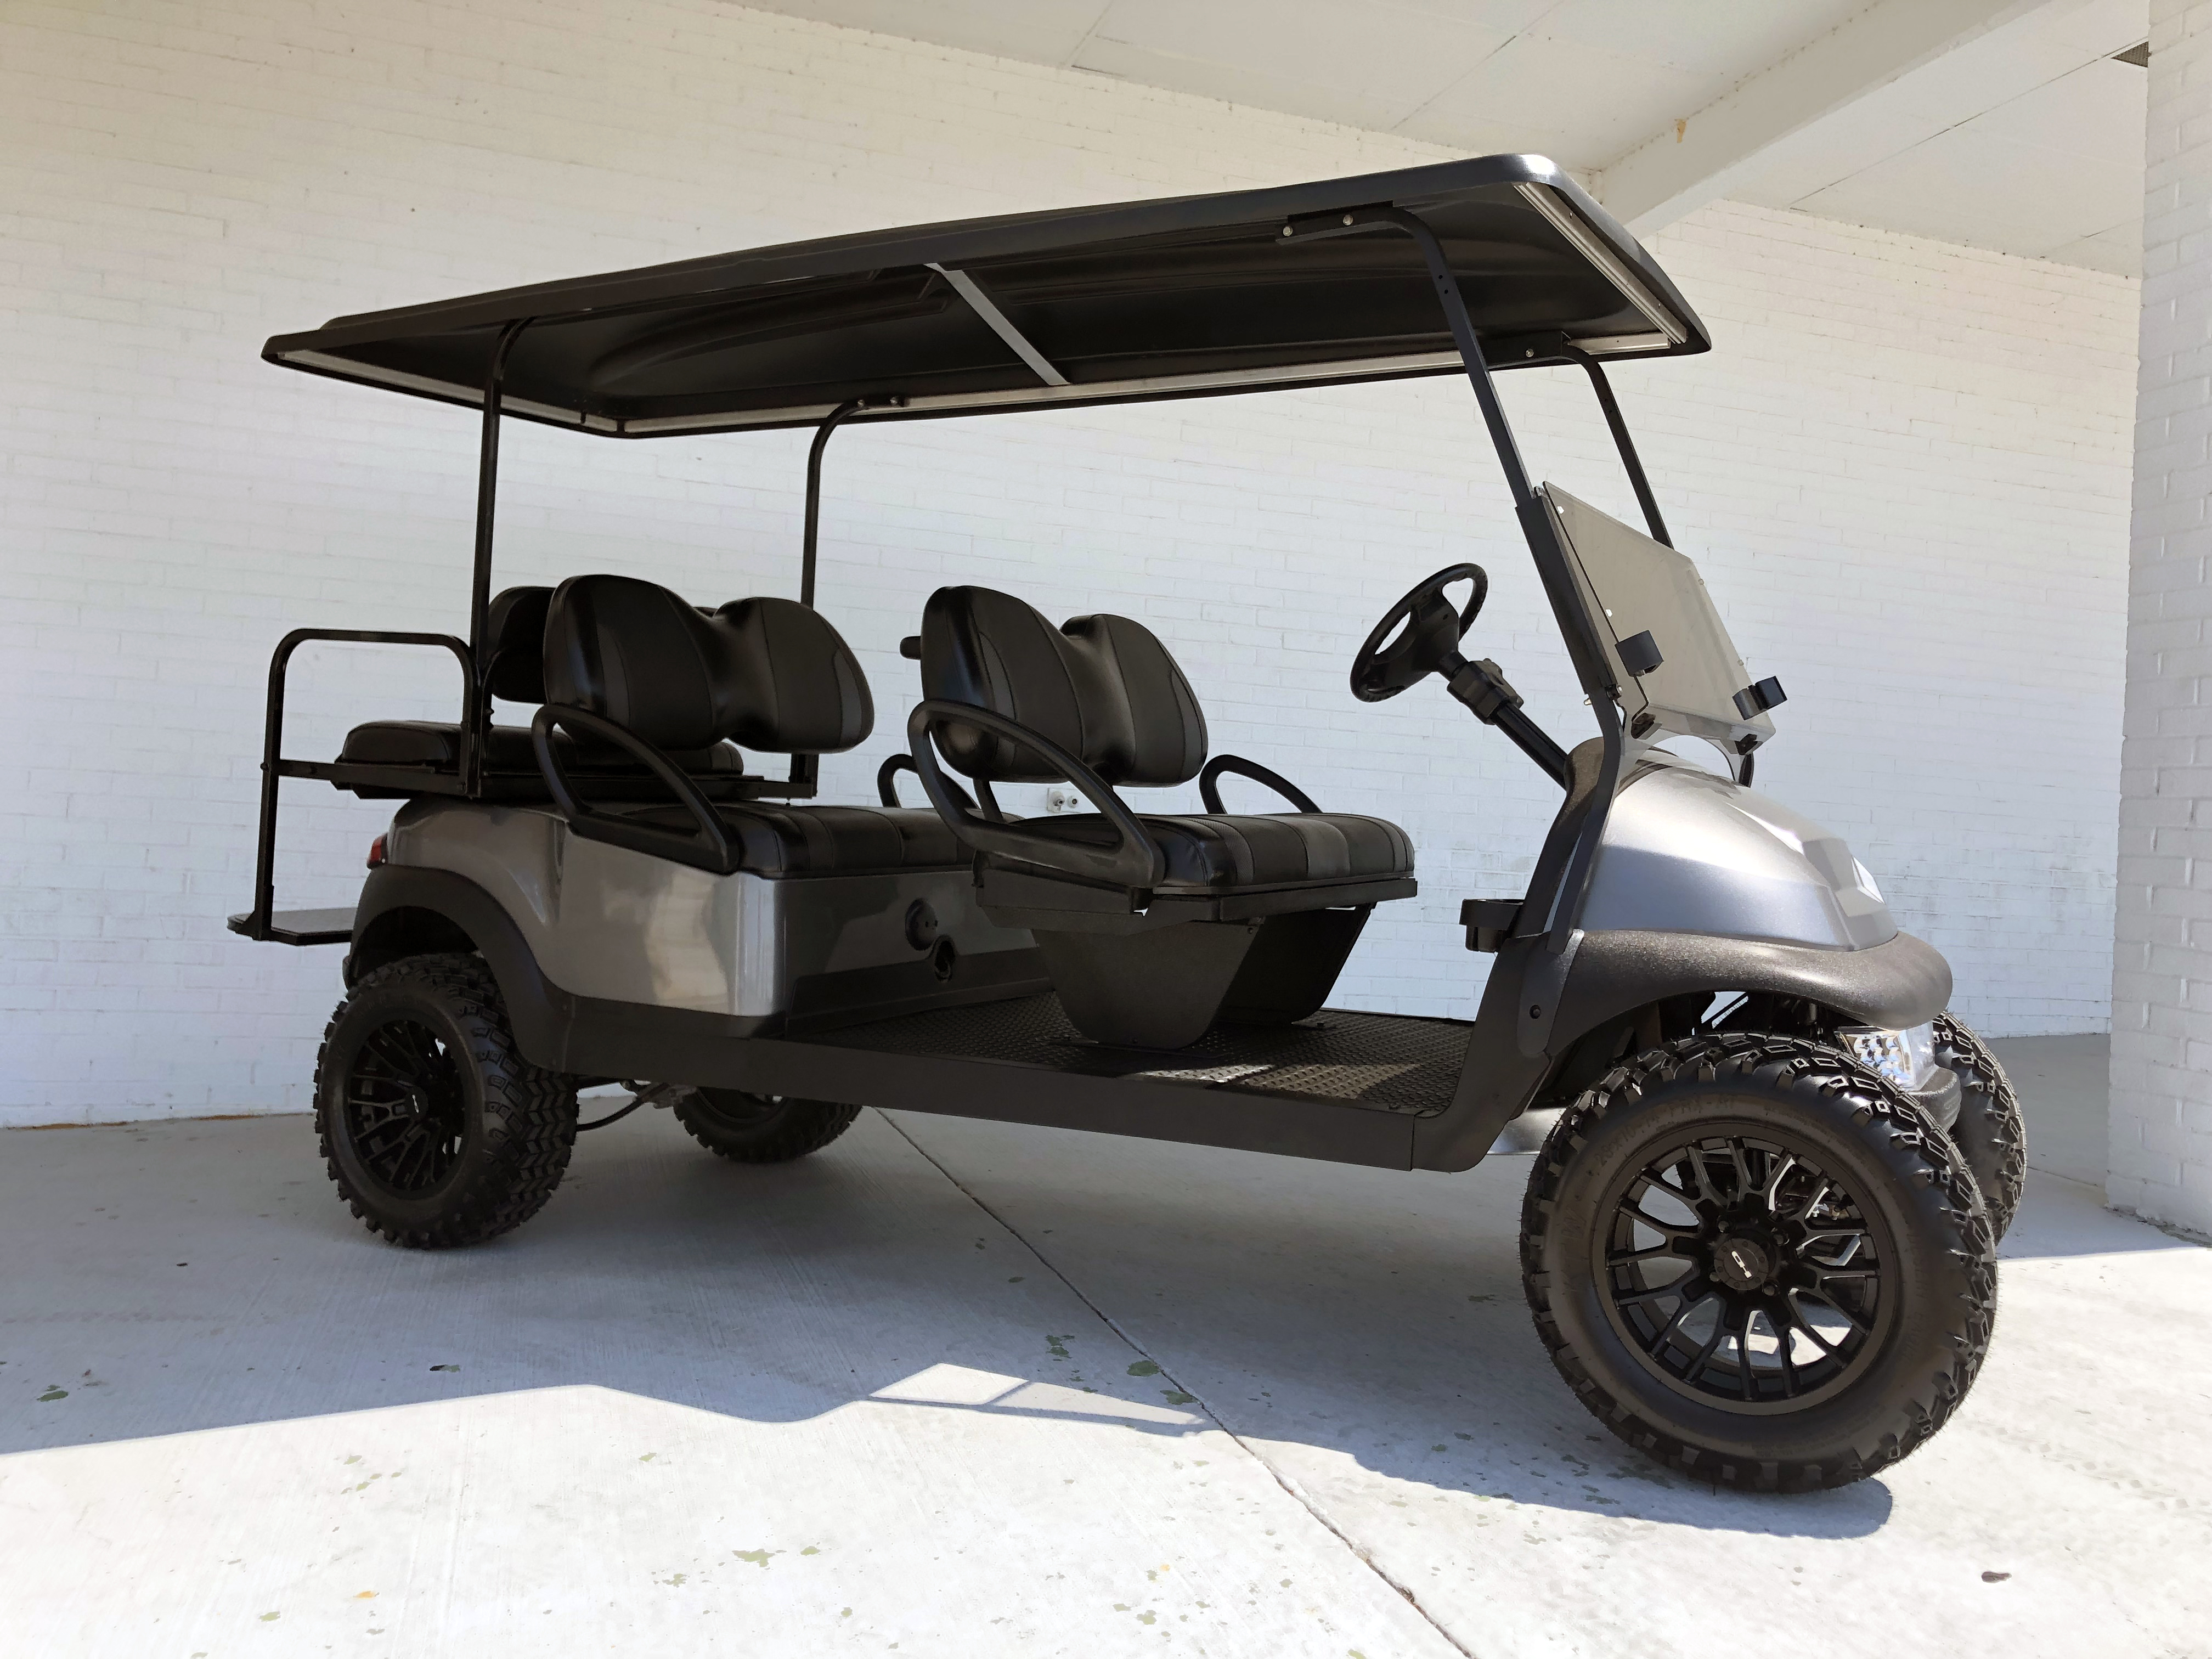 Charcoal Lifted 6 Passenger Limo Club Car Golf Cart | Golf Carts - Lifted